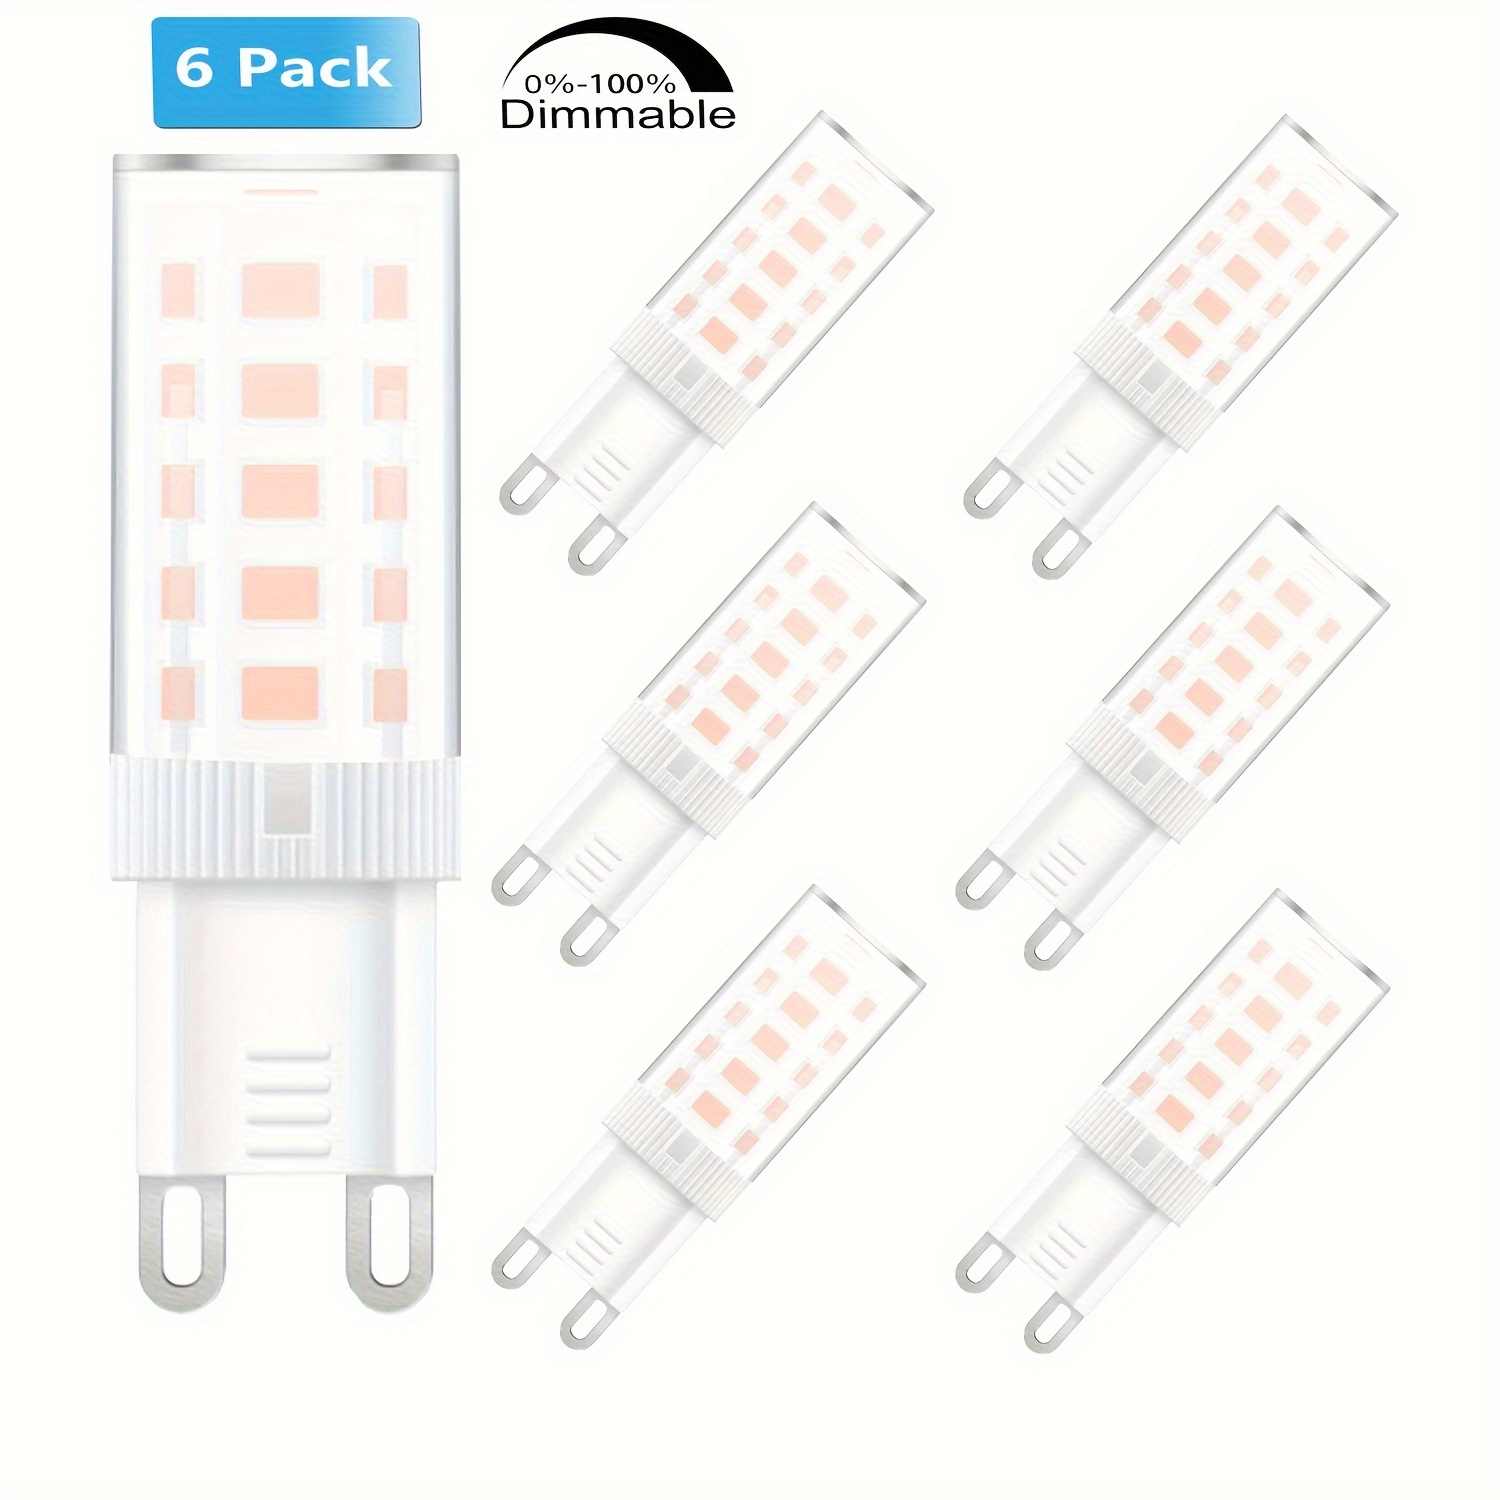 8x 2W (=20W) LED G9 Capsule 4000K Blanc Froid Ampoule Remplacement Lampe